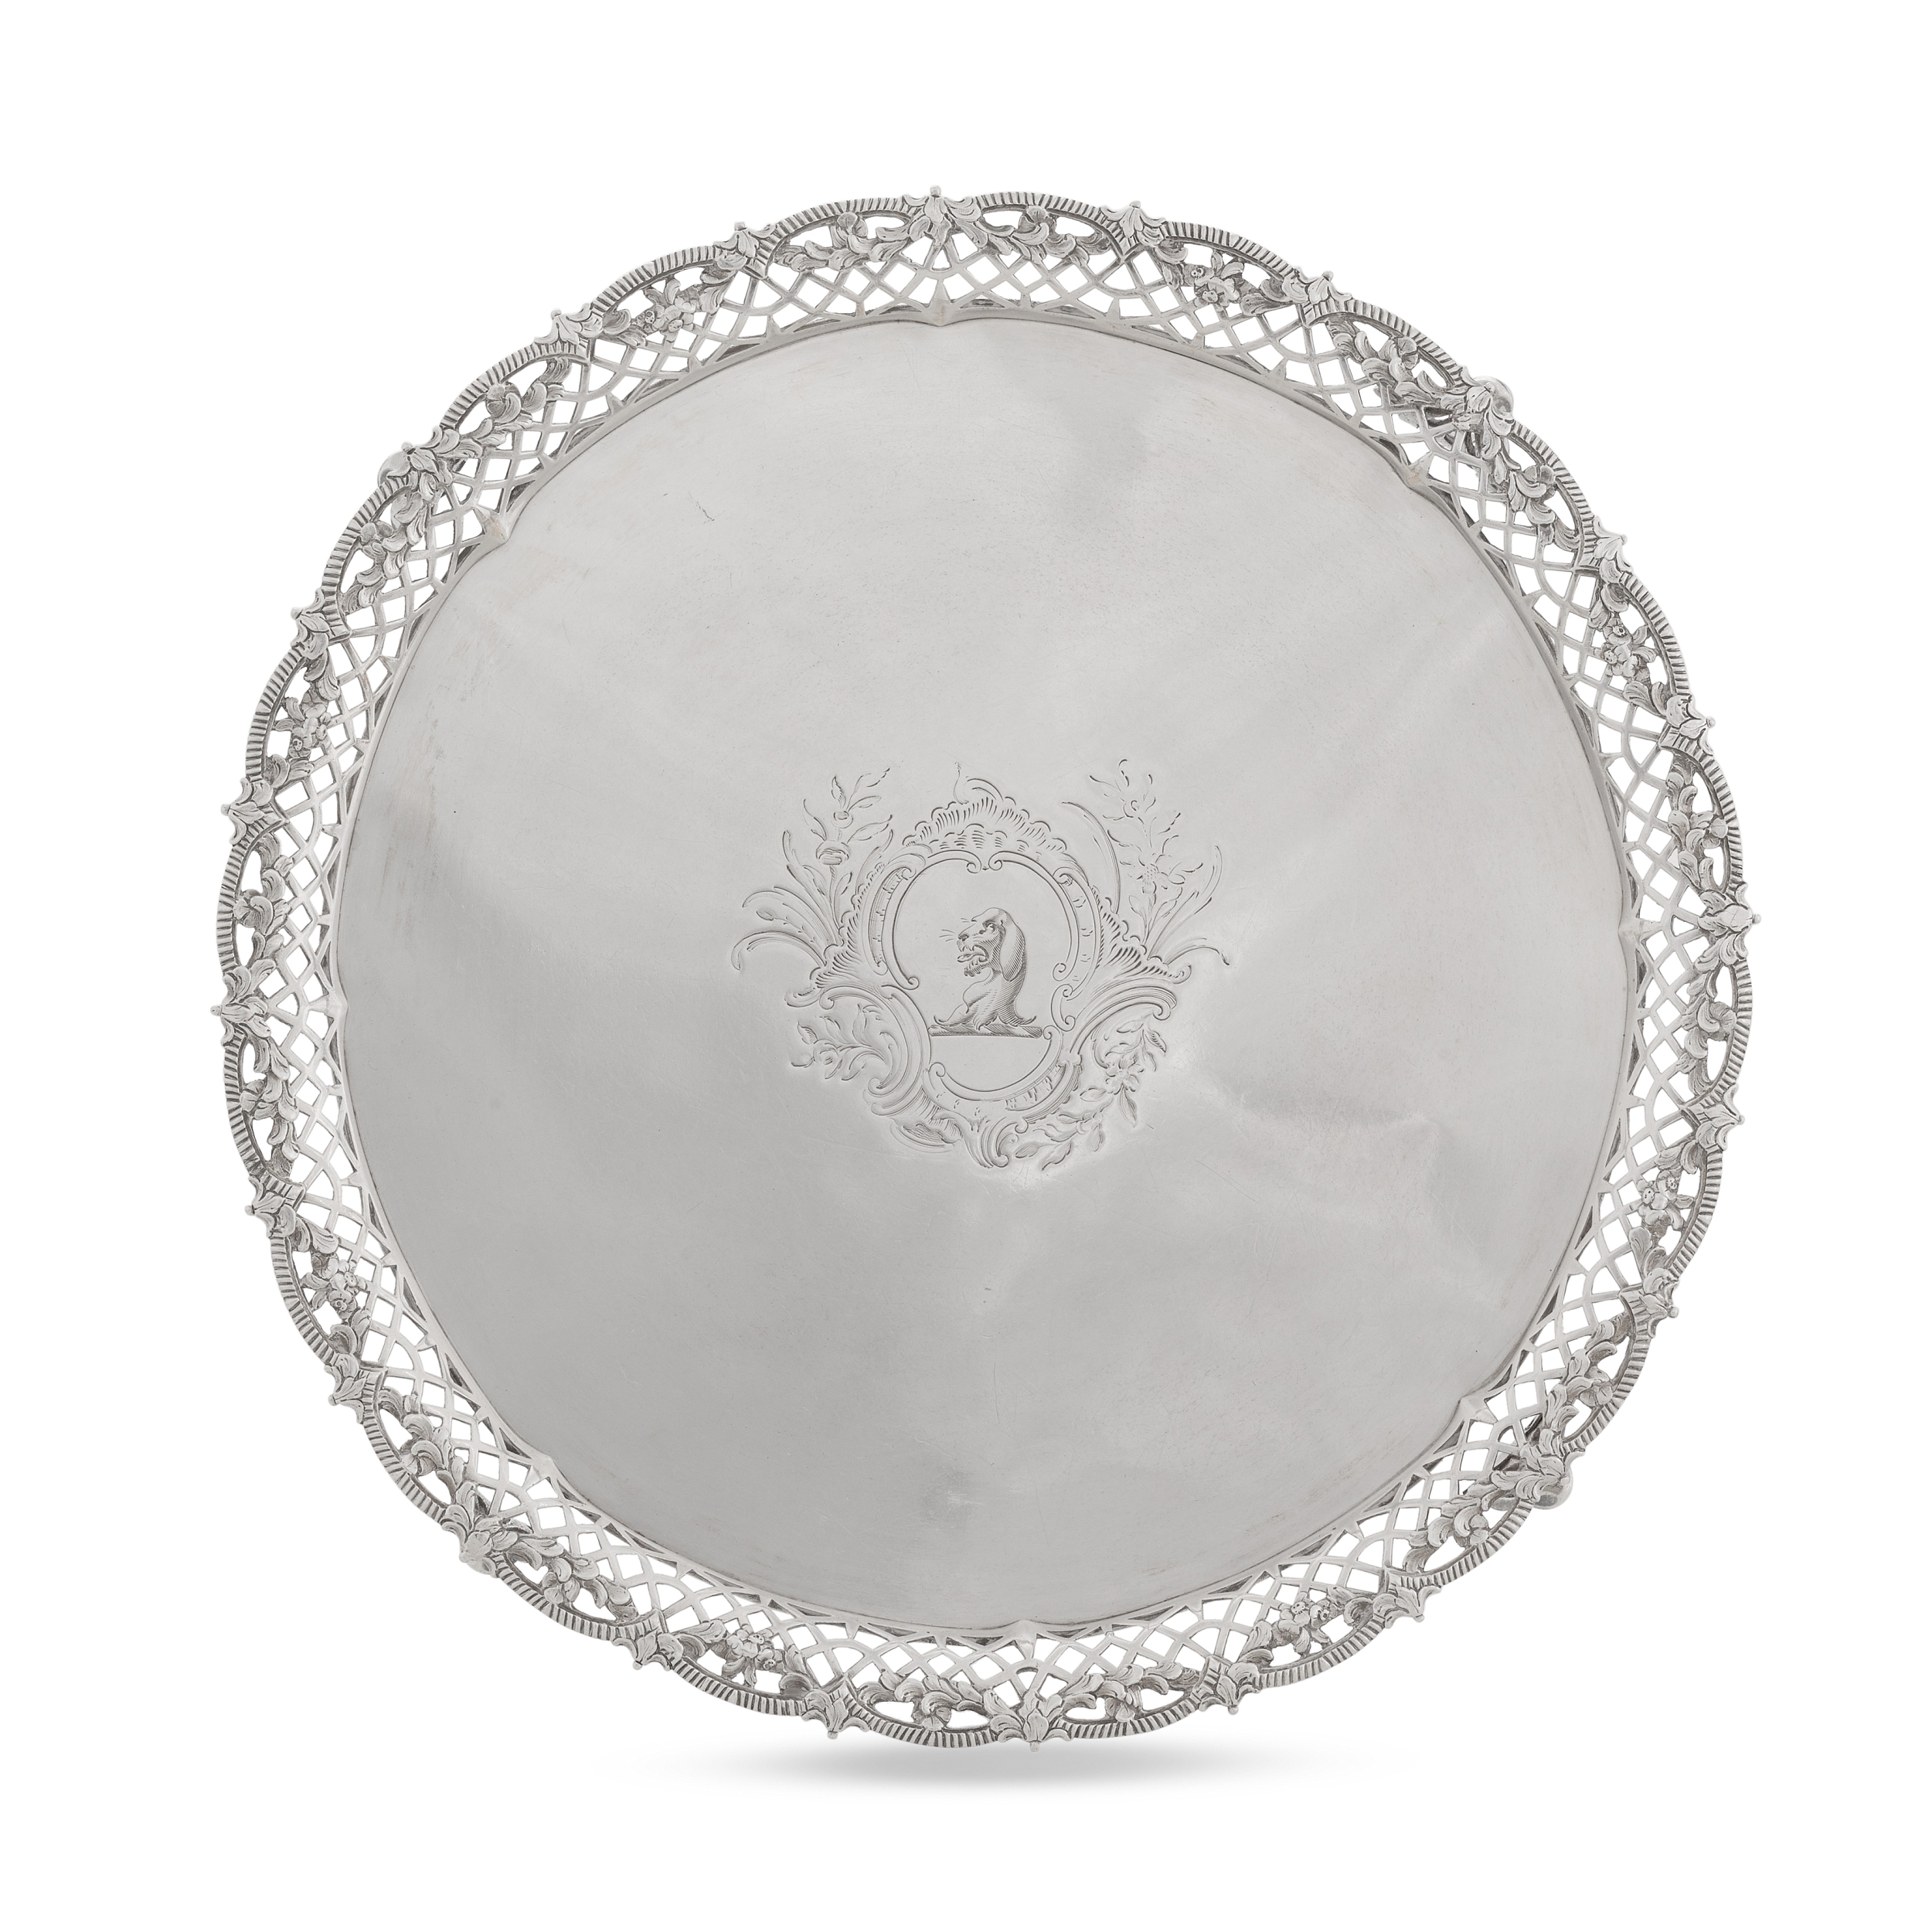 A suite of George II silver waiters and salver, Herne & Butty, London, 1758 - Image 2 of 5